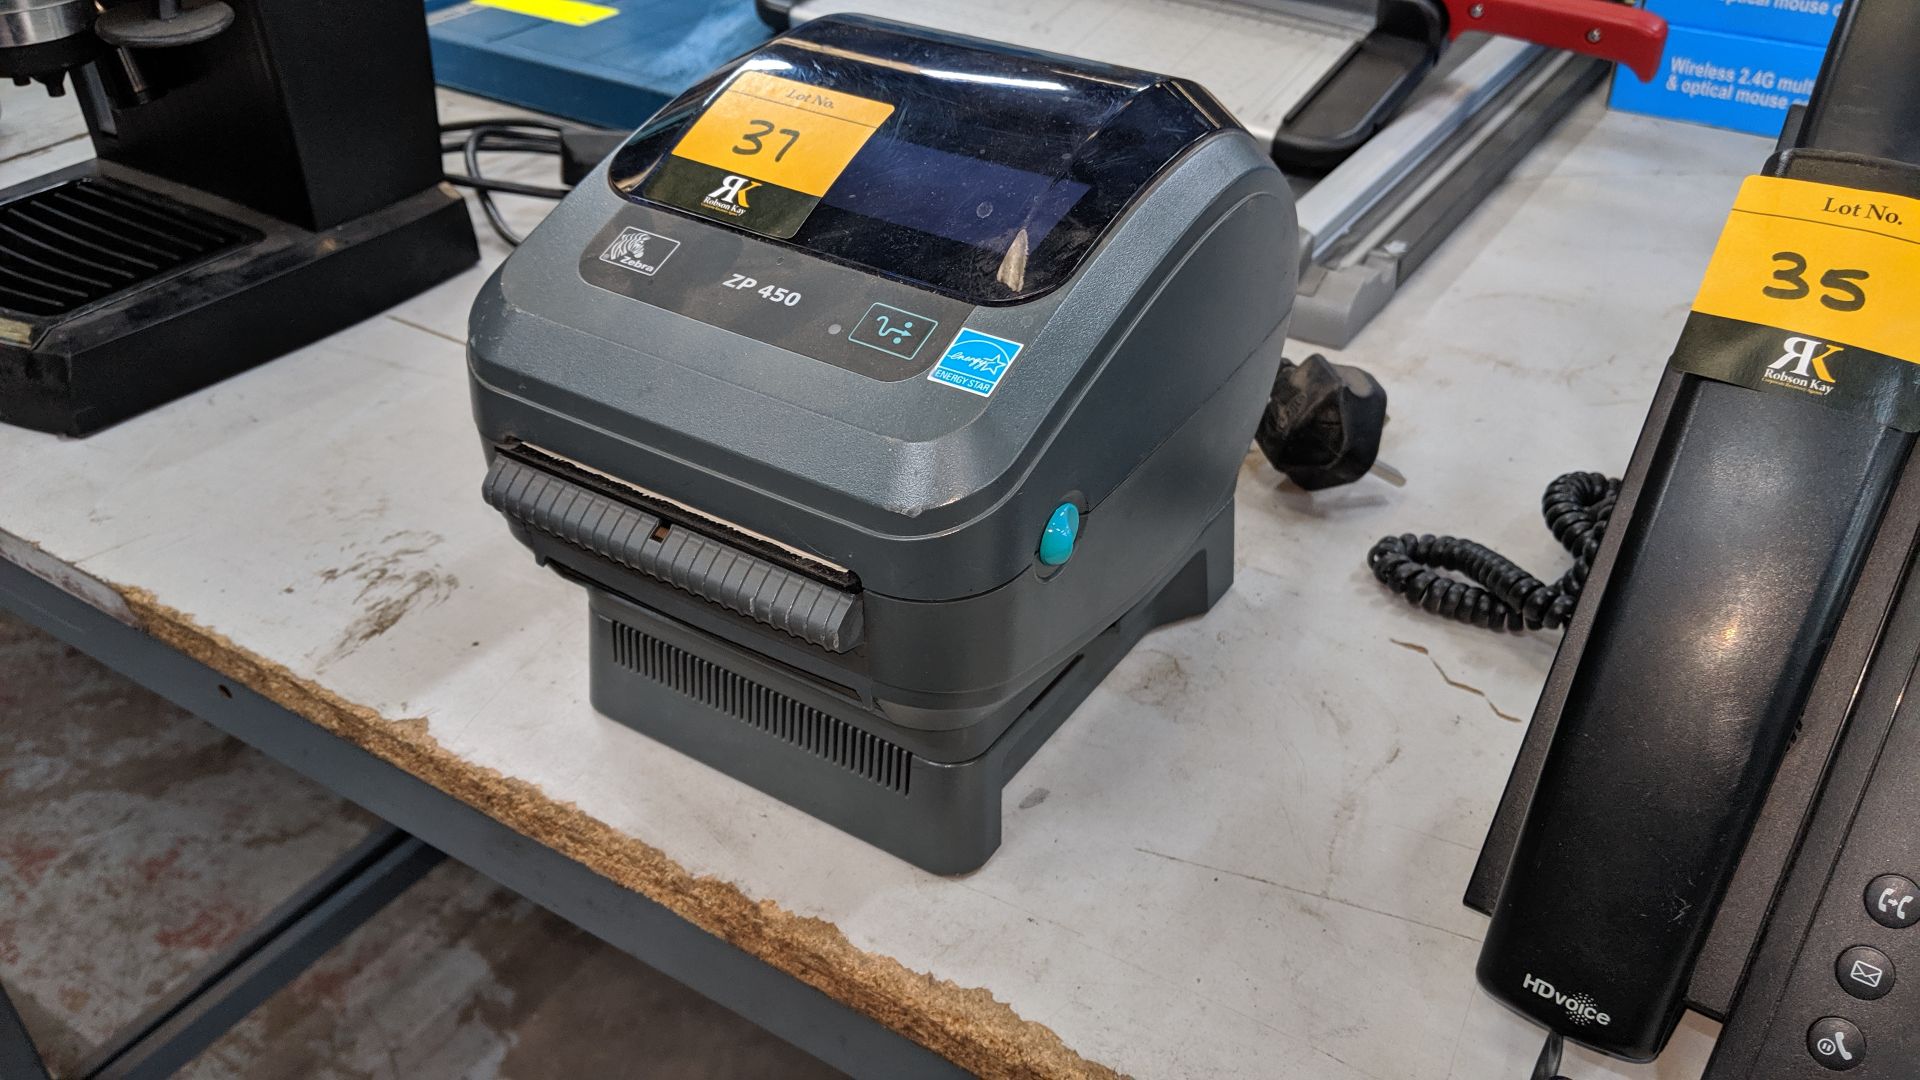 Zebra ZP450 label printer on pedestal power pack. This is one of a number of lots being sold on - Image 2 of 5